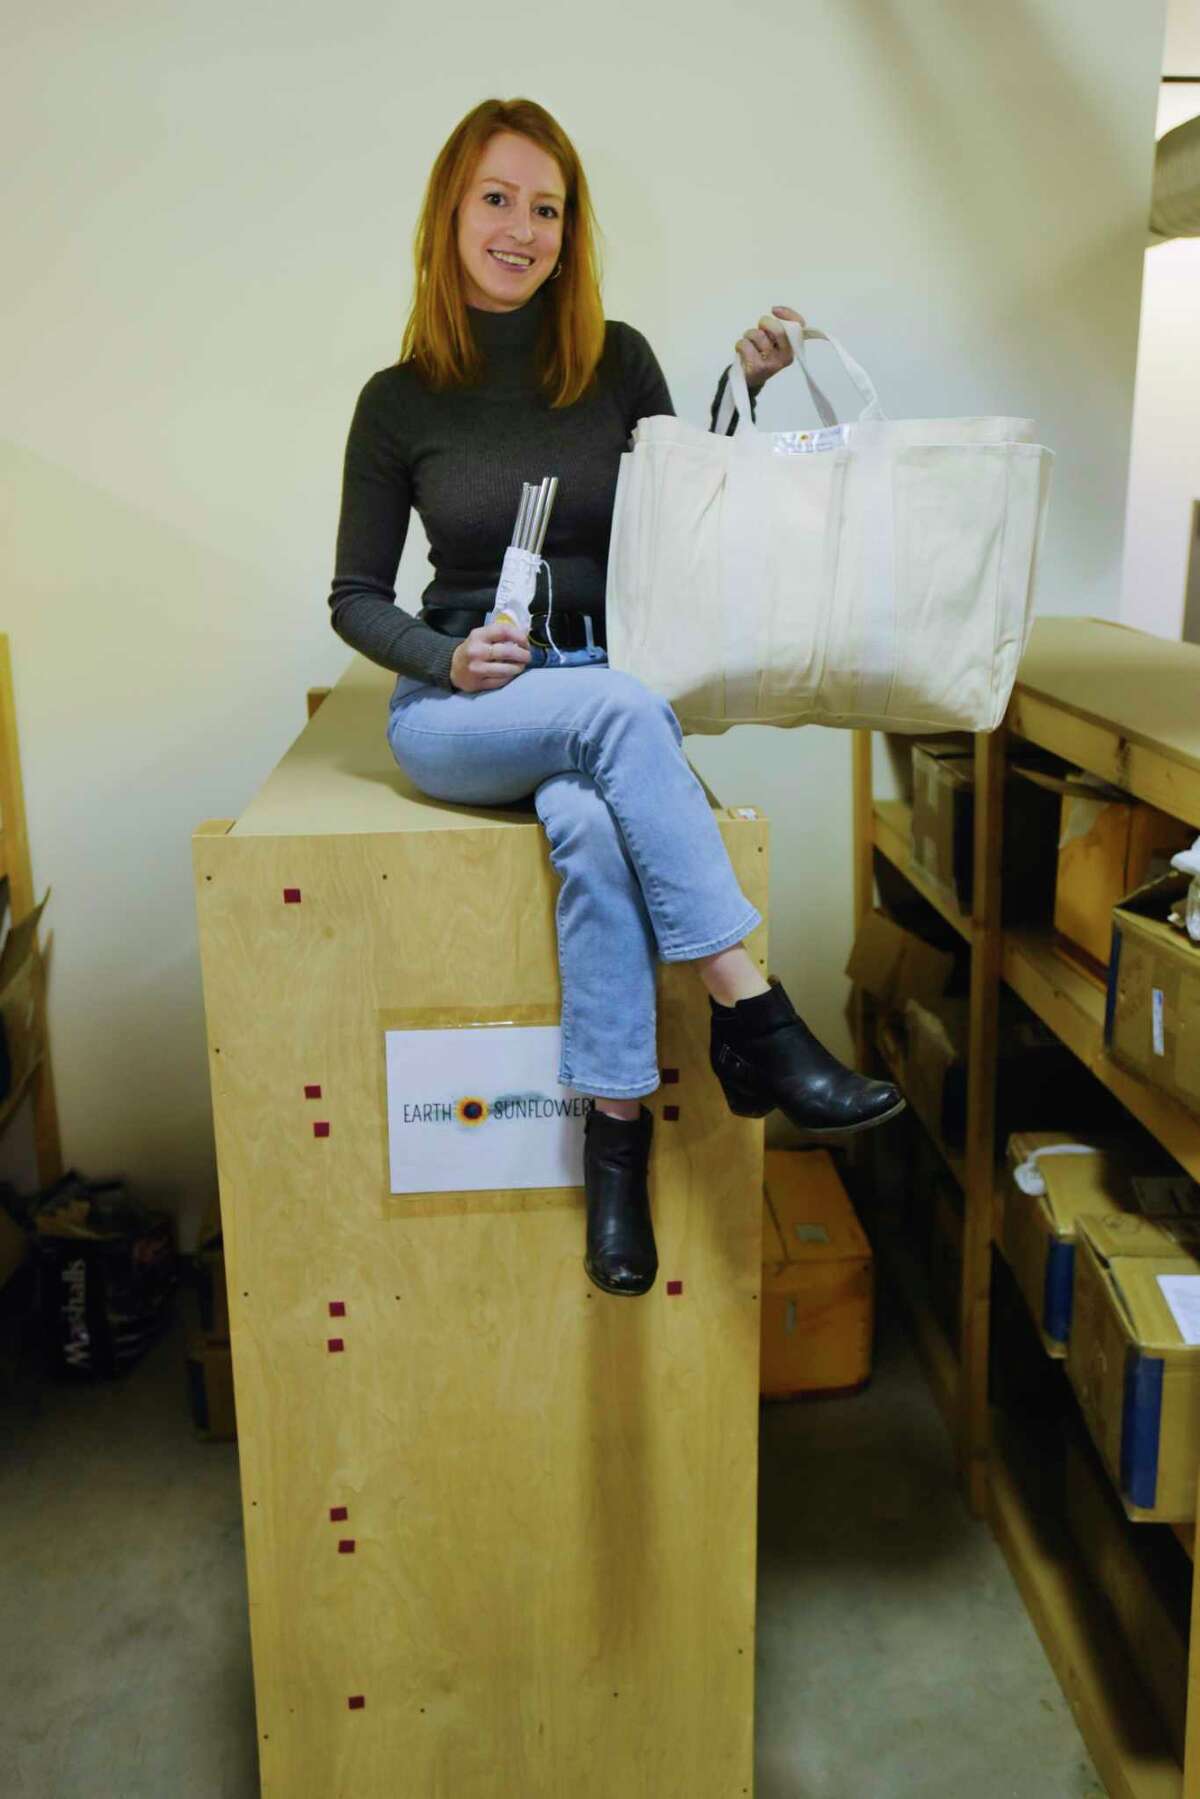 Jill Fecteau, owner of Earth Sunflower, sits on top of shelves holding boxes of the products she sells inside a warehouse where she rents space on Wednesday, Jan. 27, 2021, in Saratoga Springs, N.Y. Fecteau is holding stainless steel straws, which she started her business with, and a certified organic cotton extra large grocery bag with outside pockets, one of her bigger selling items currently. (Paul Buckowski/Times Union)